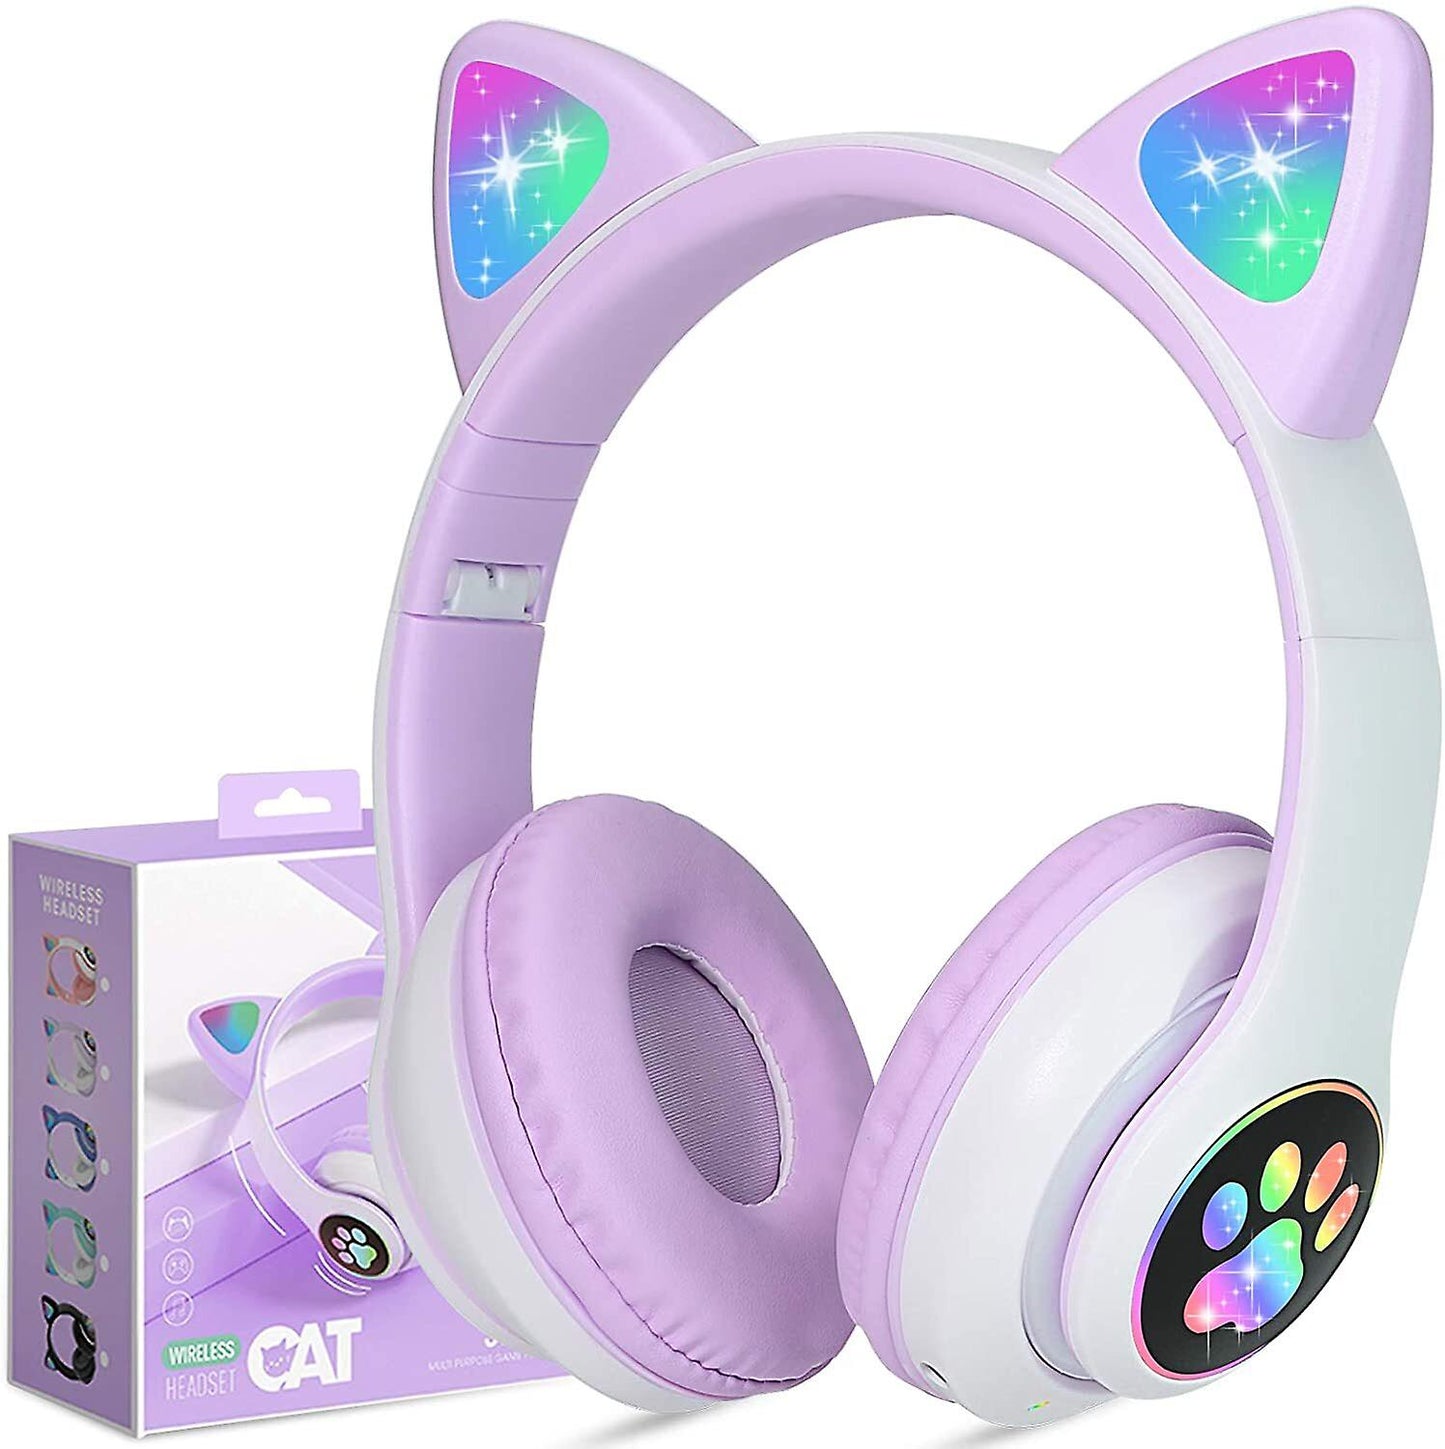 Cat Wireless Headset | Noise Consolation system